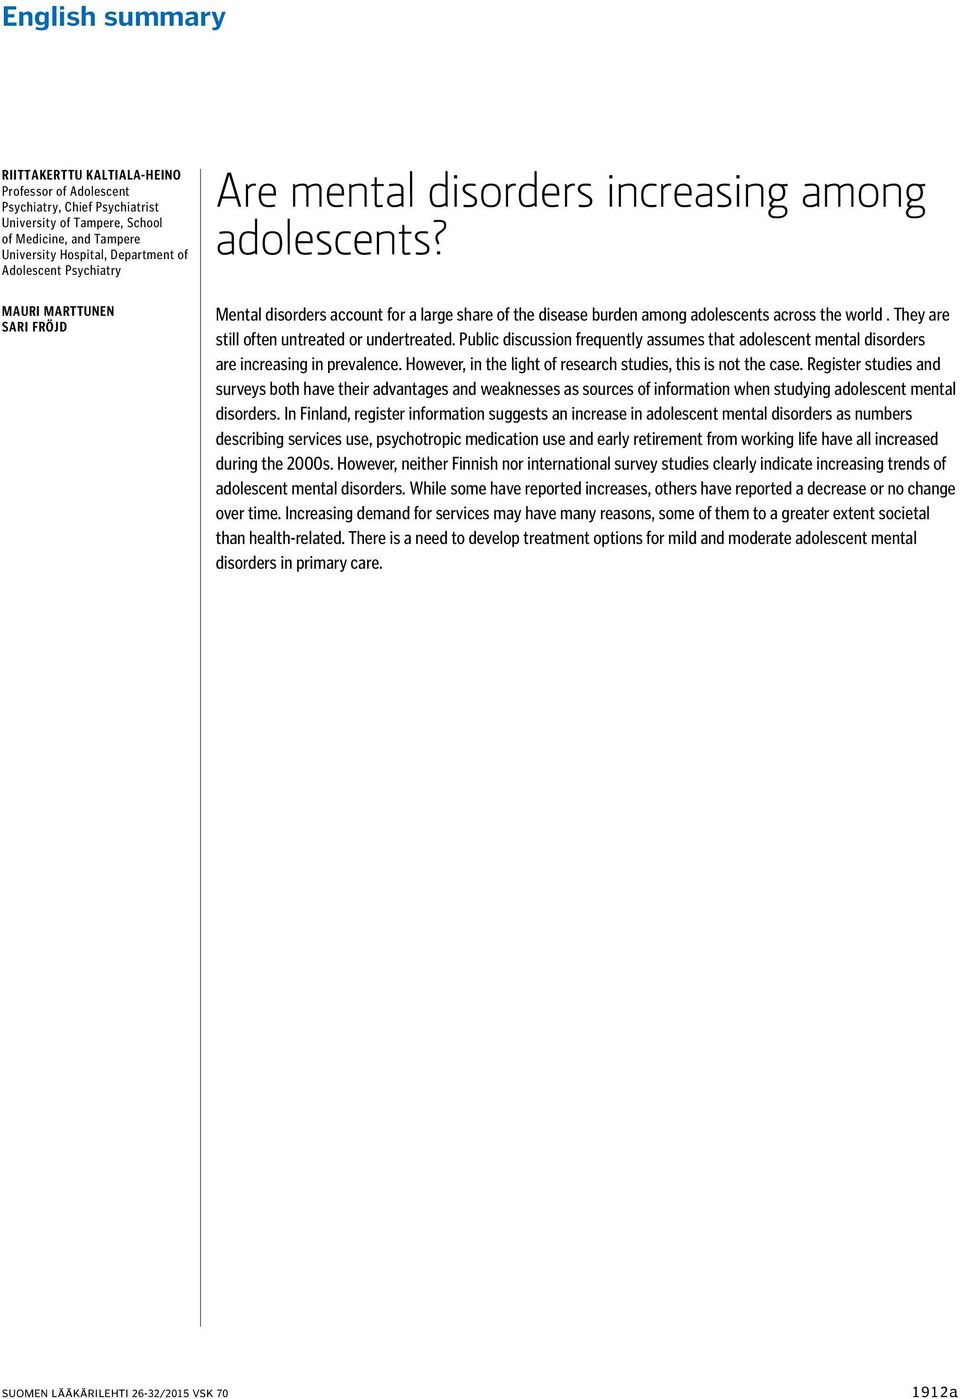 They are still often untreated or undertreated. Public discussion frequently assumes that adolescent mental disorders are increasing in prevalence.